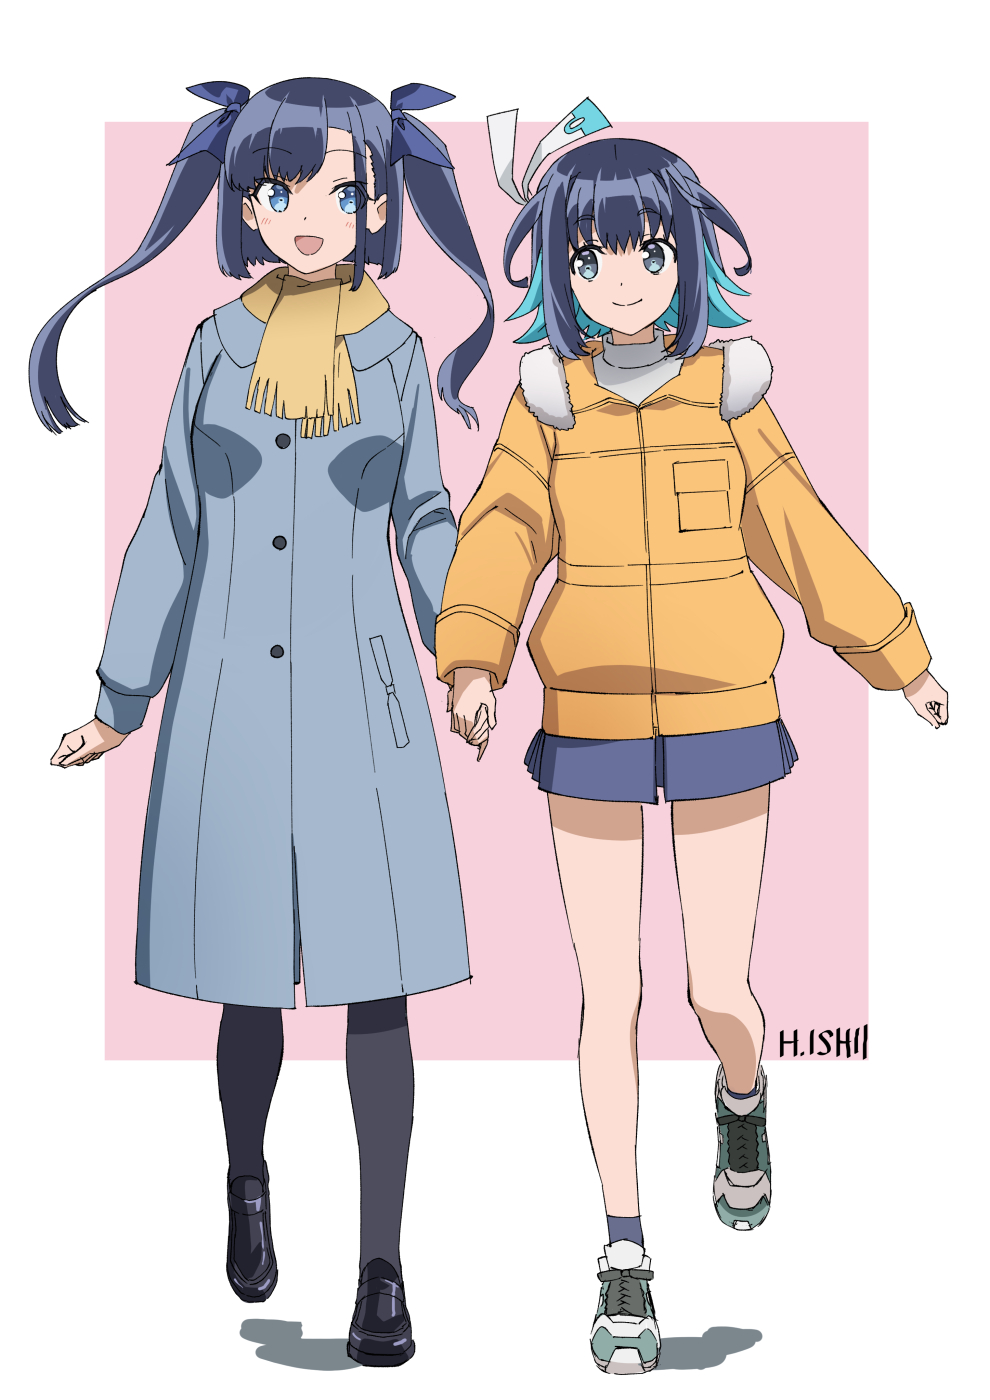 16bit_sensation 2girls akisato_konoha black_hair blue_eyes blue_hair coat fur_collar highres holding_hands ishii_hisao jacket long_hair looking_at_another multicolored_hair multiple_girls open_mouth pantyhose scarf shoes short_hair skirt smile sneakers twintails two-tone_hair yamada_touya